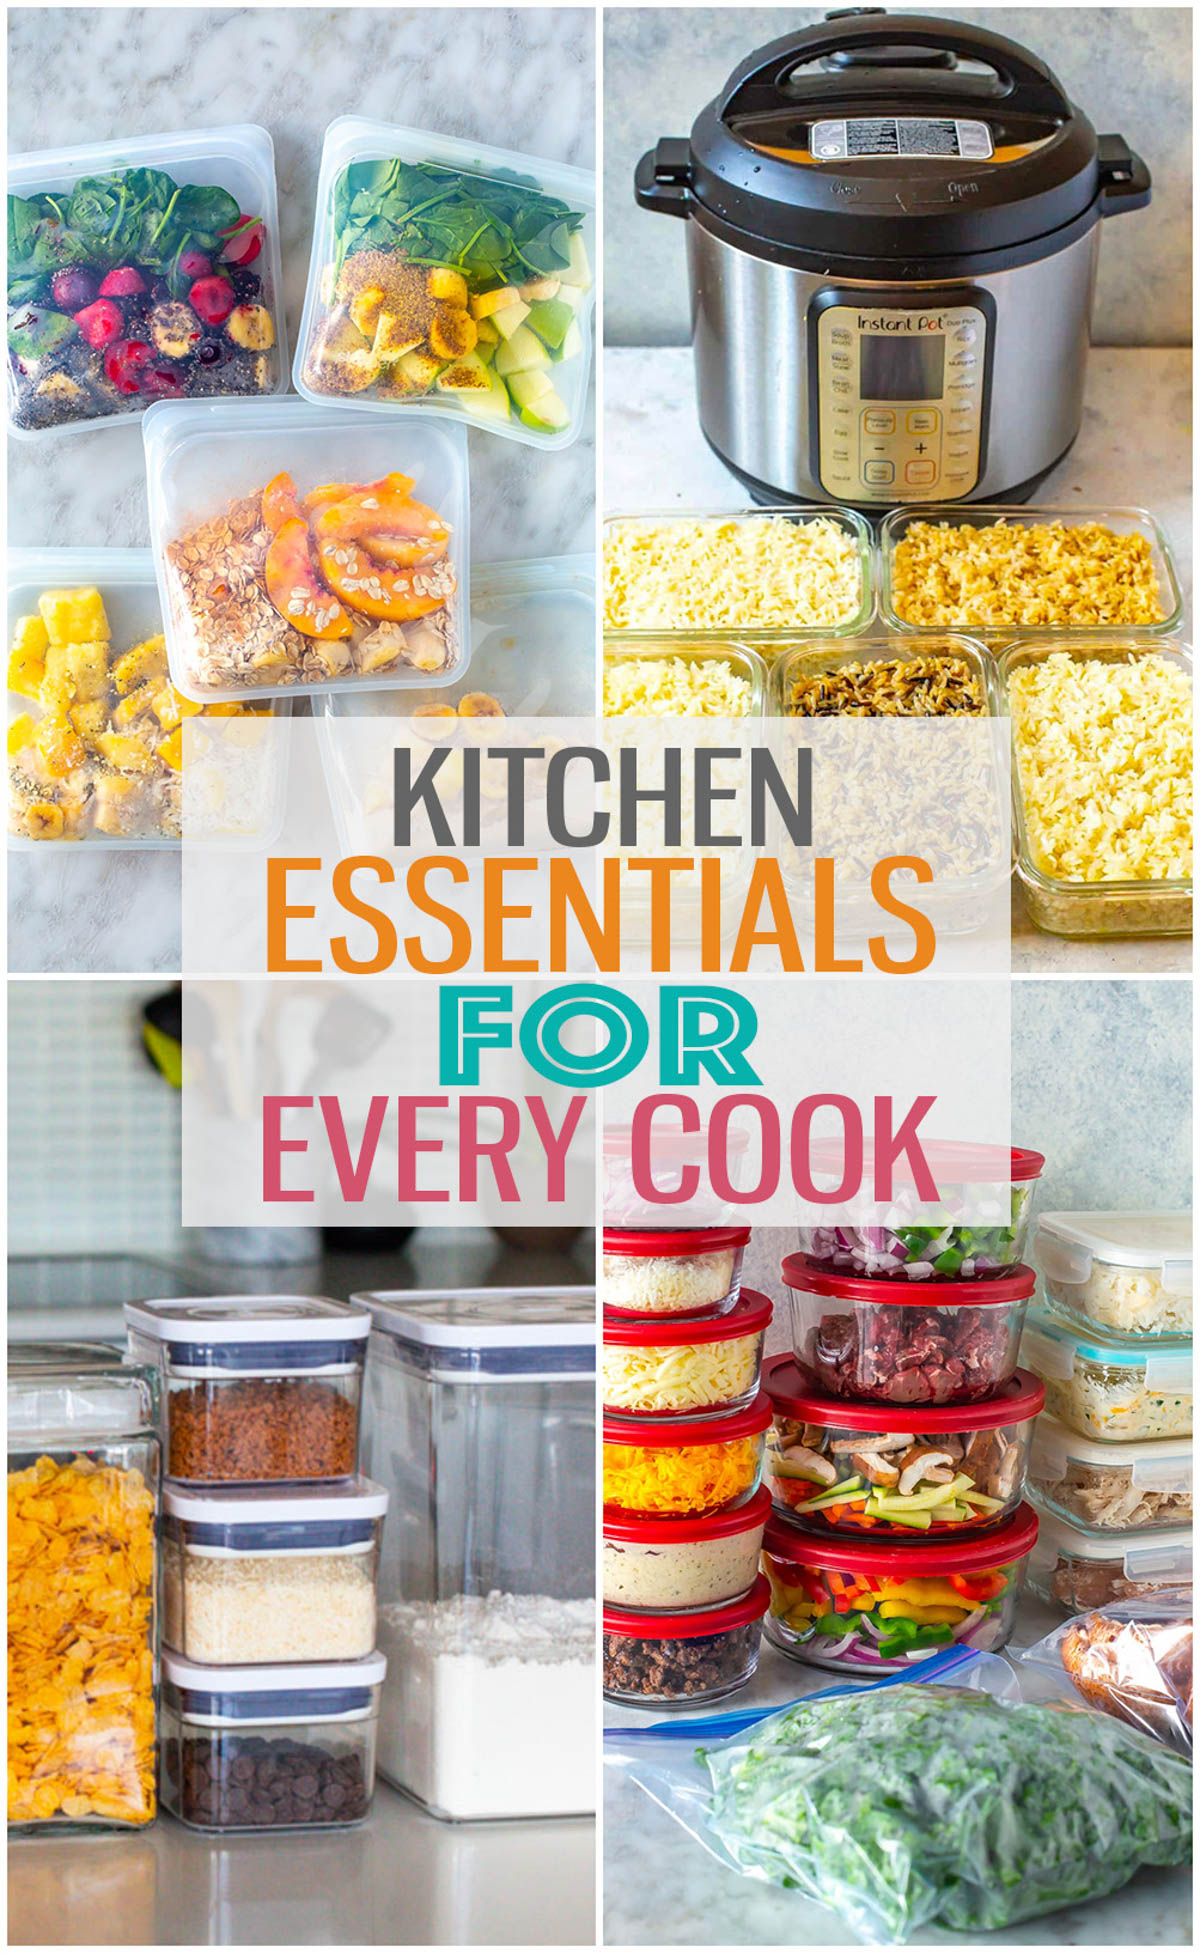 A college of kitchen tools with the text "Kitchen Essentials for Every Cook" layered over top.